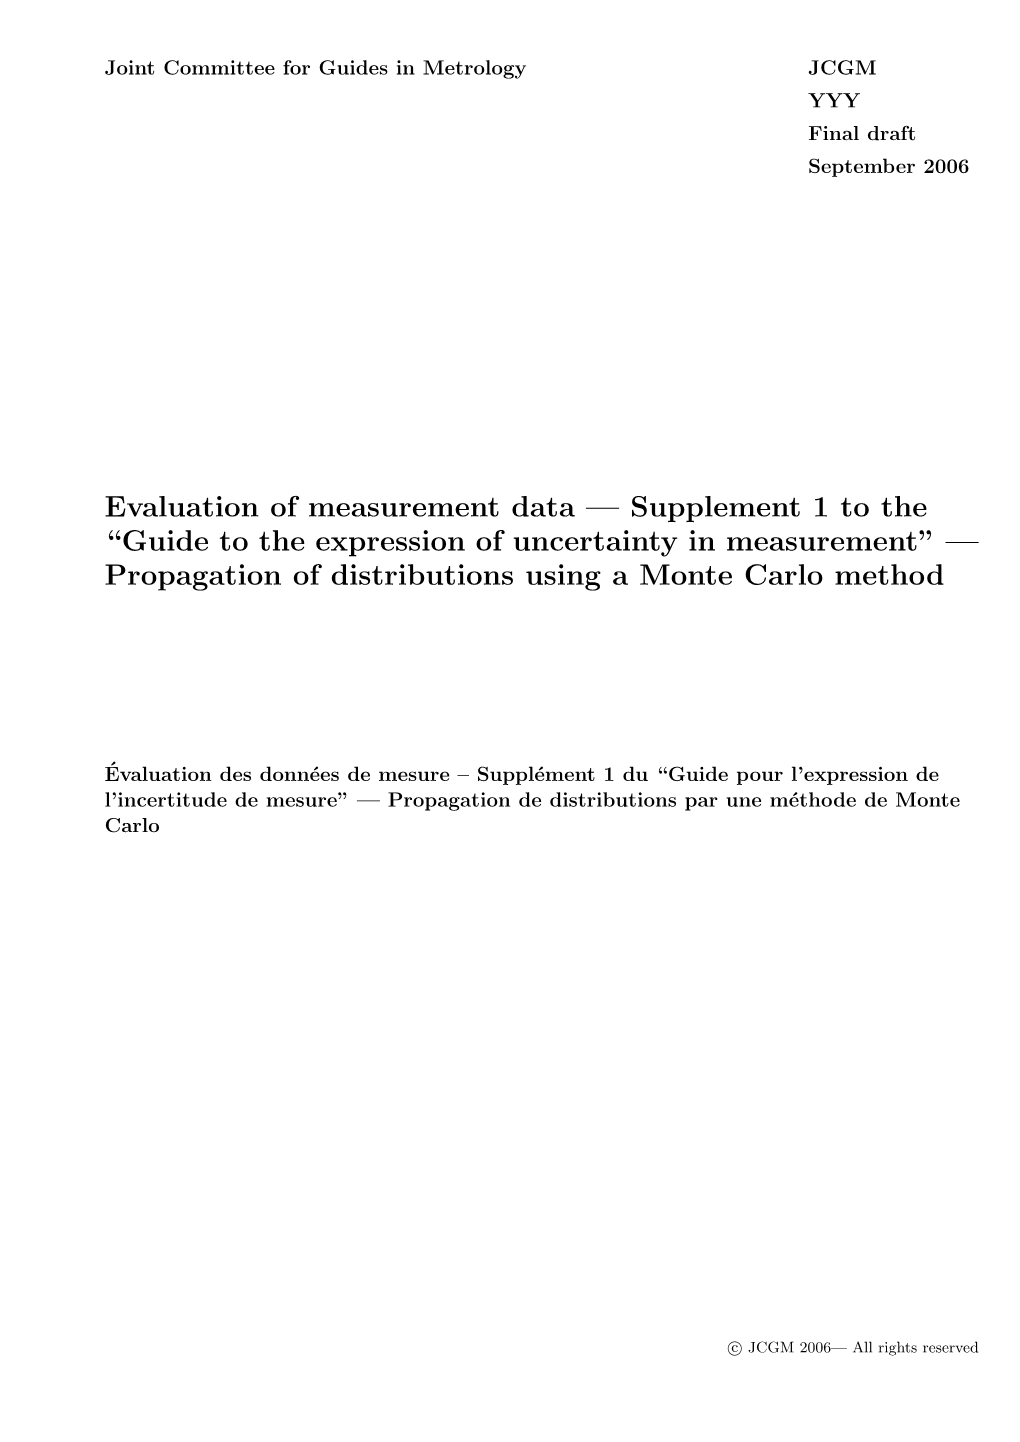 Evaluation of Measurement Data — Supplement 1 to the “Guide to the Expression of Uncertainty in Measurement” — Propagation of Distributions Using a Monte Carlo Method